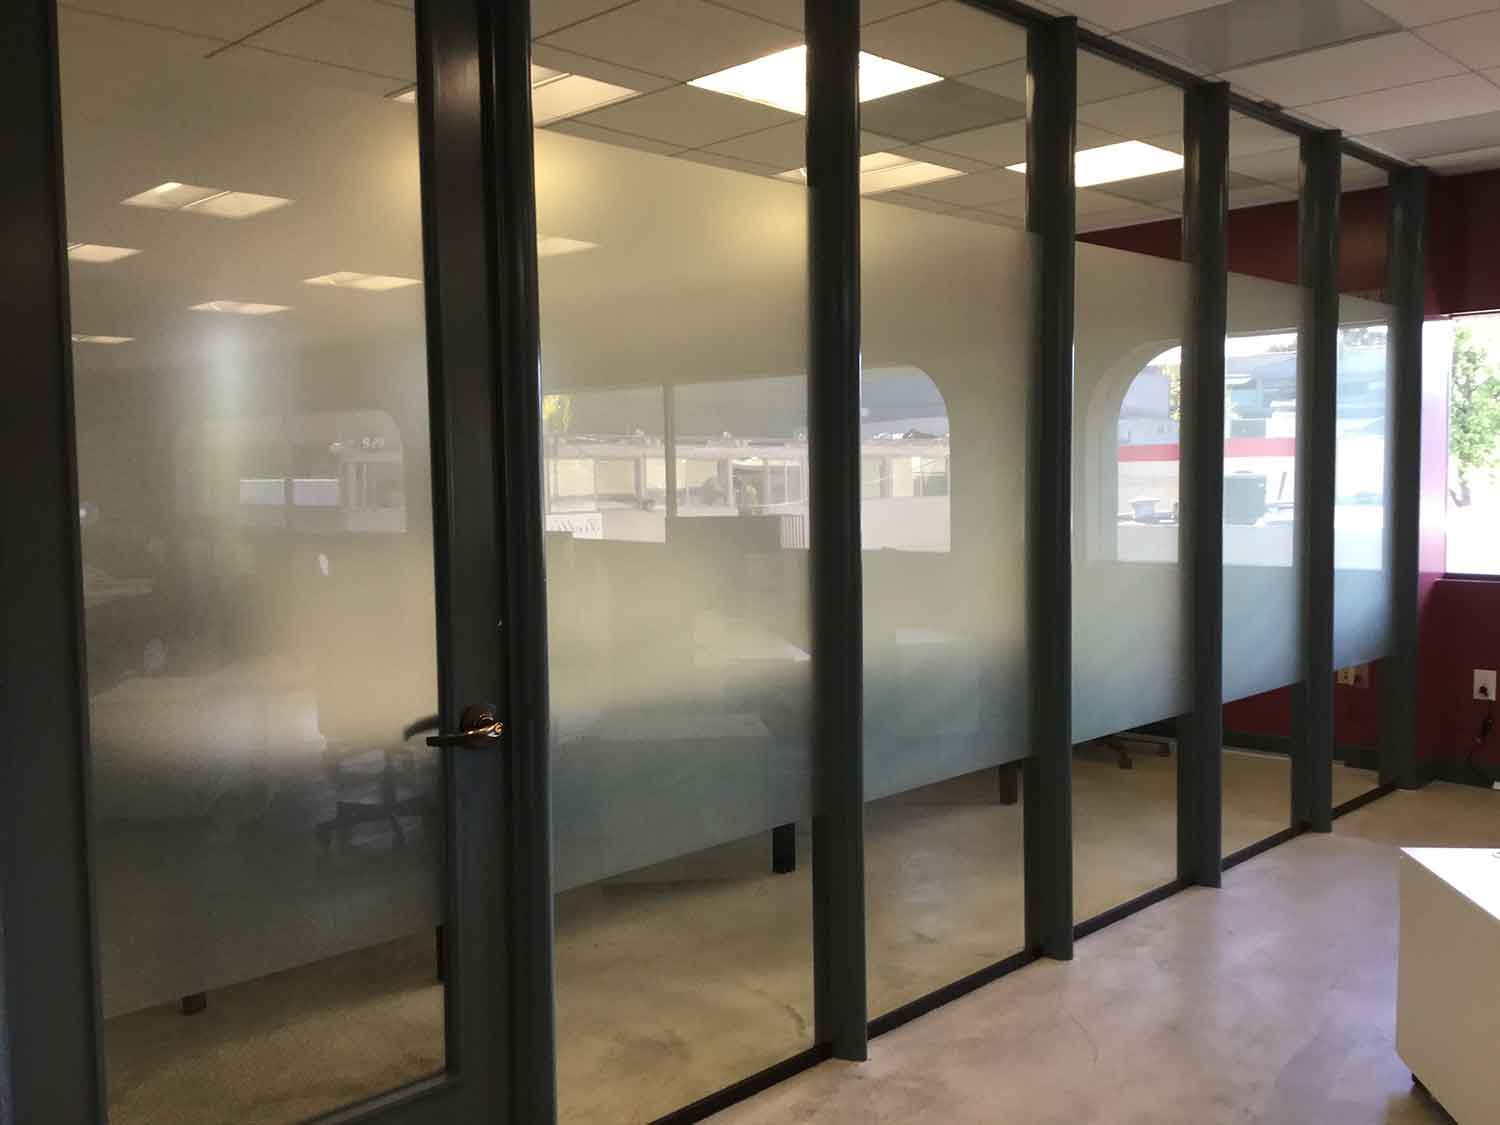 Create Privacy At Work With 3M Fasara Film